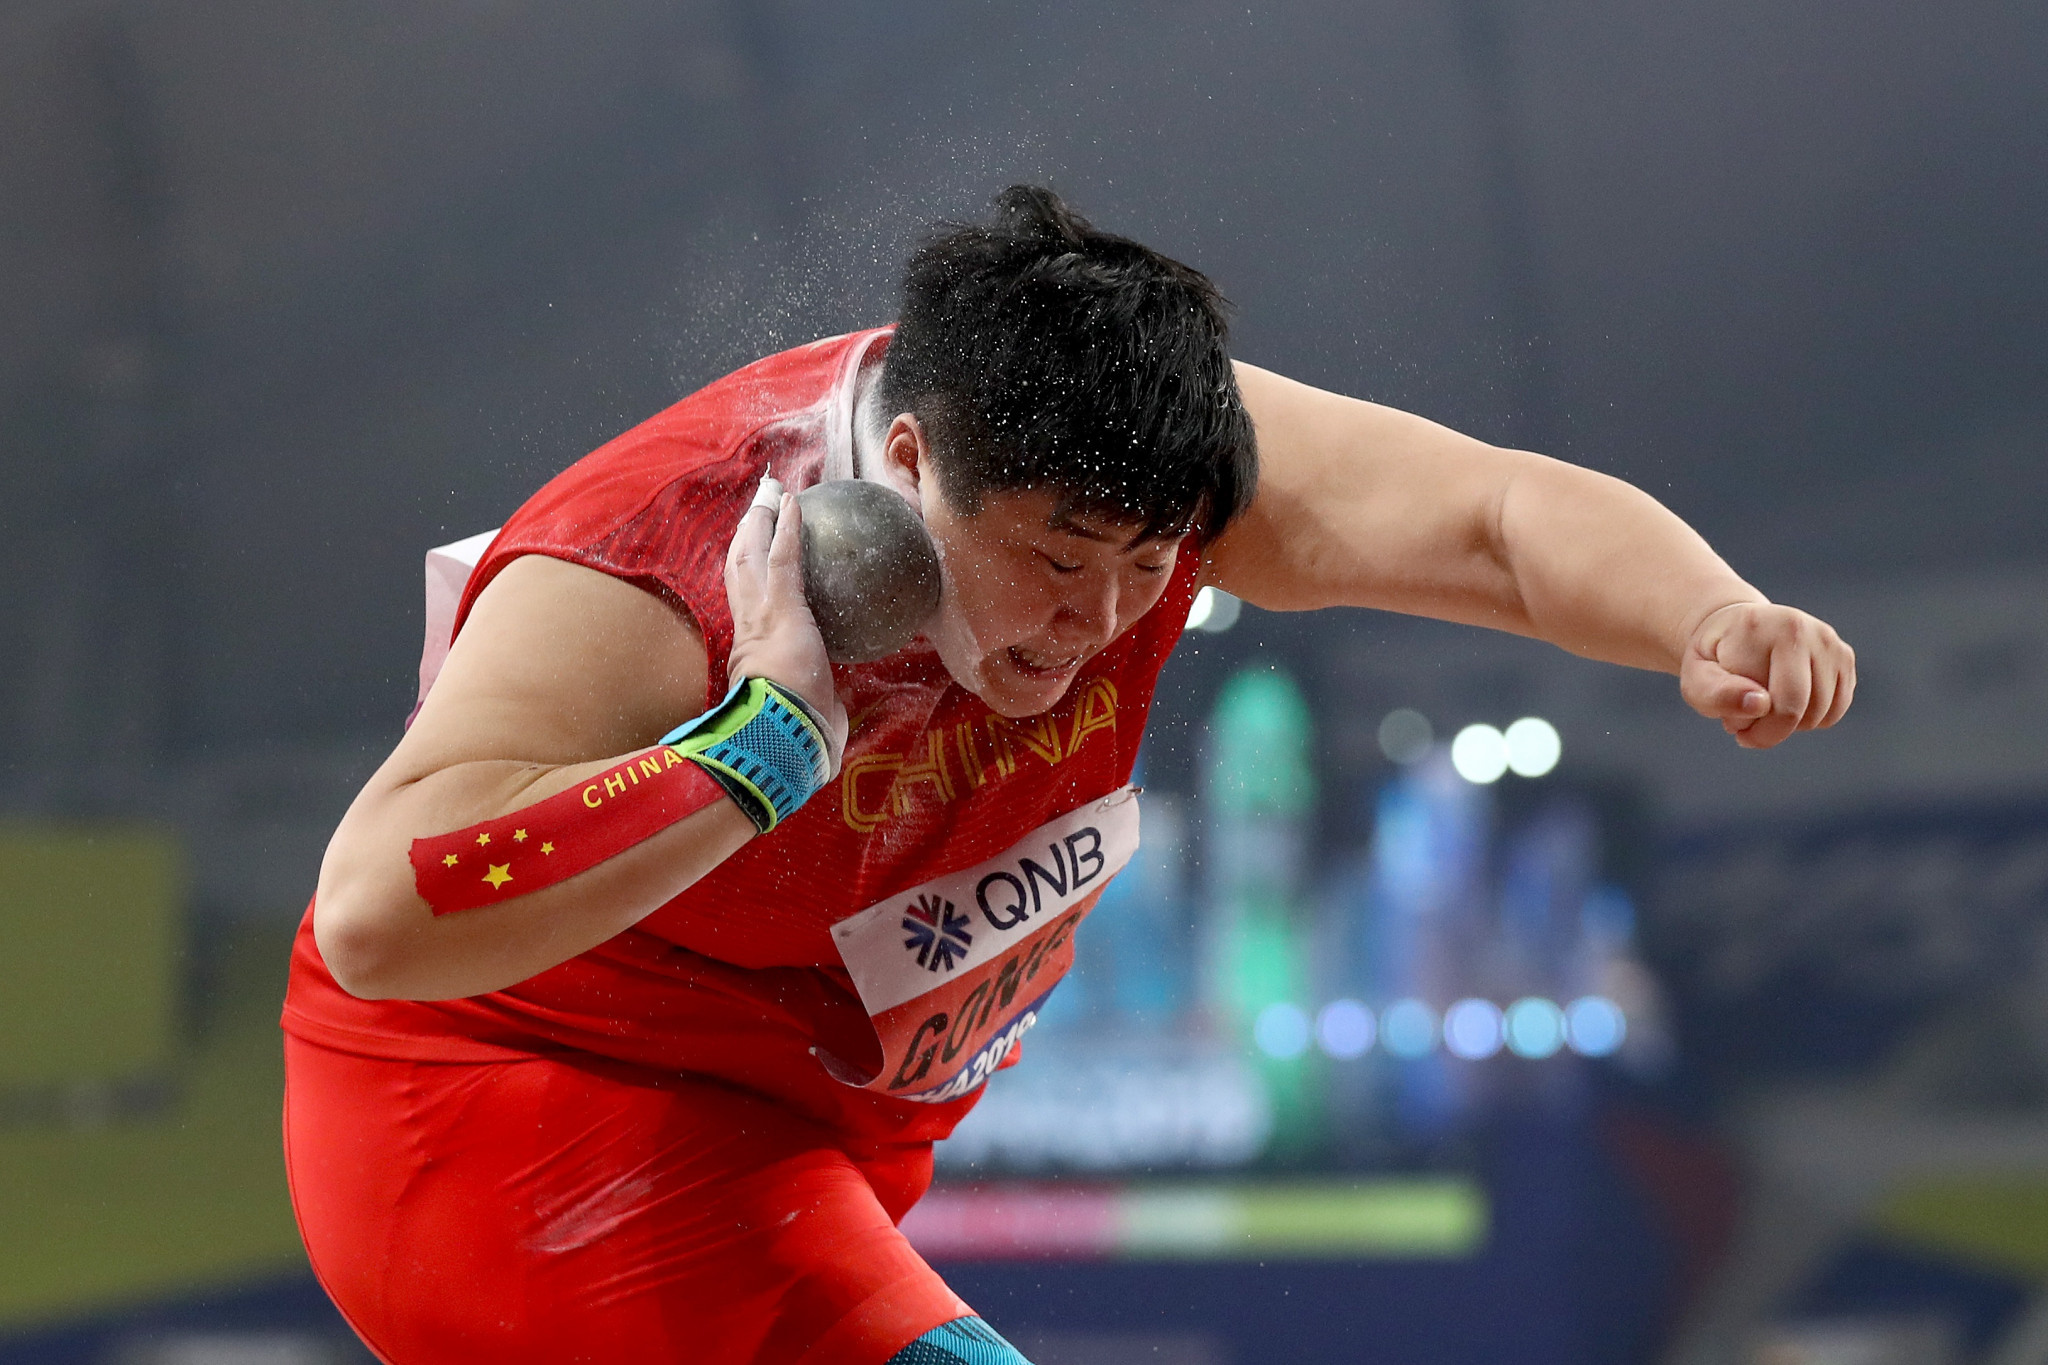 Shot putter Gong throws world lead as first indoor athletics event held in China since coronavirus outbreak